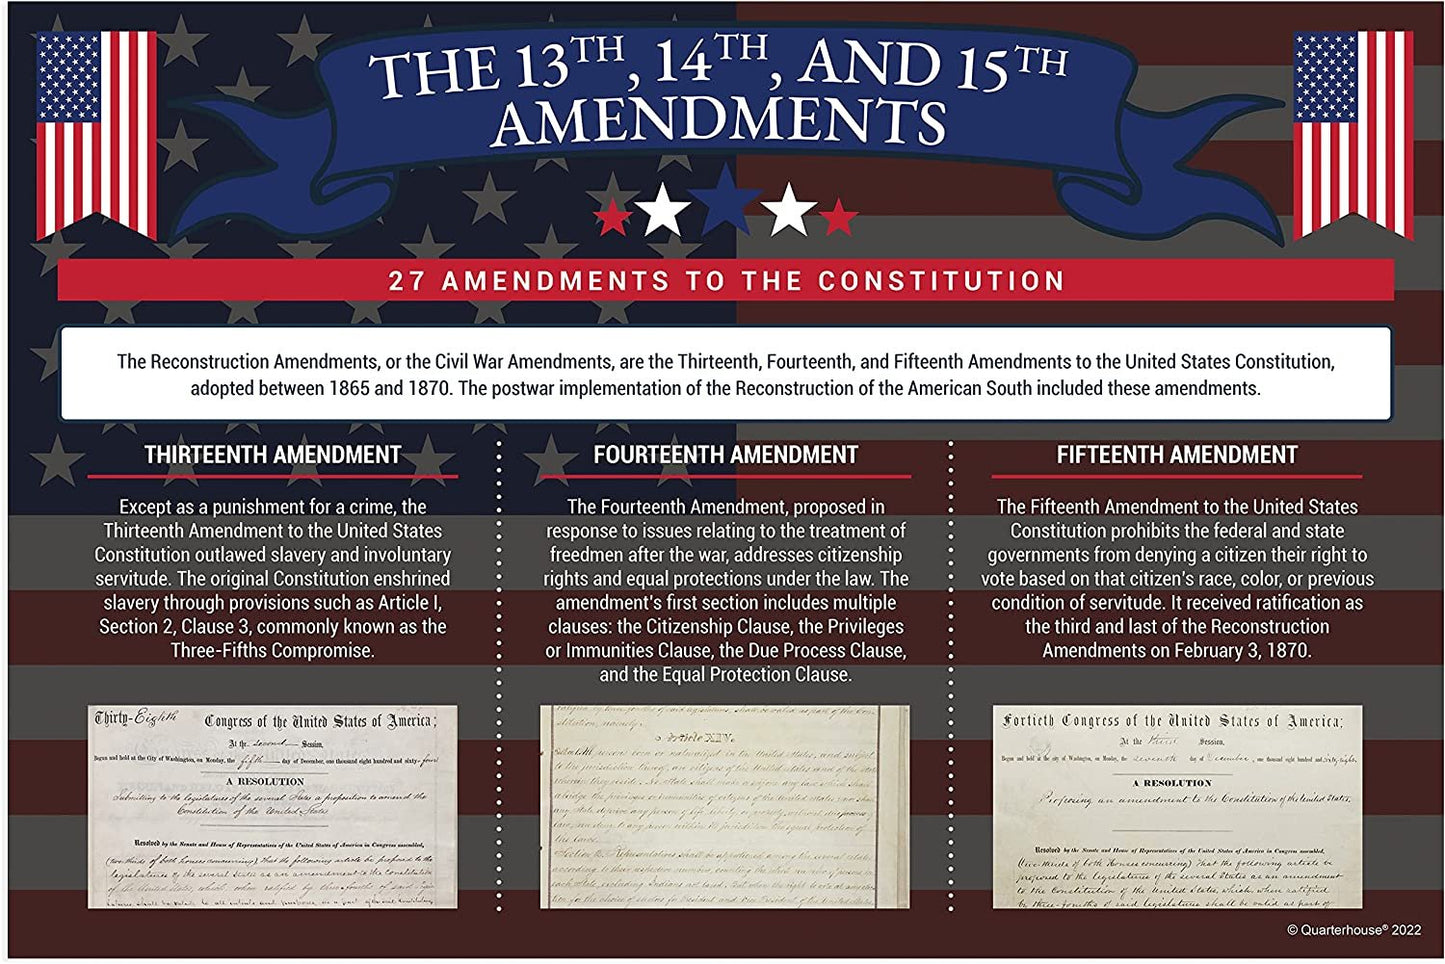 Quarterhouse 27 Amendments to the US Constitution (Bill of Rights Included) Poster Set, Social Studies Classroom Learning Materials for K-12 Students and Teachers, Set of 8, 12 x 18 Inches, Extra Durable